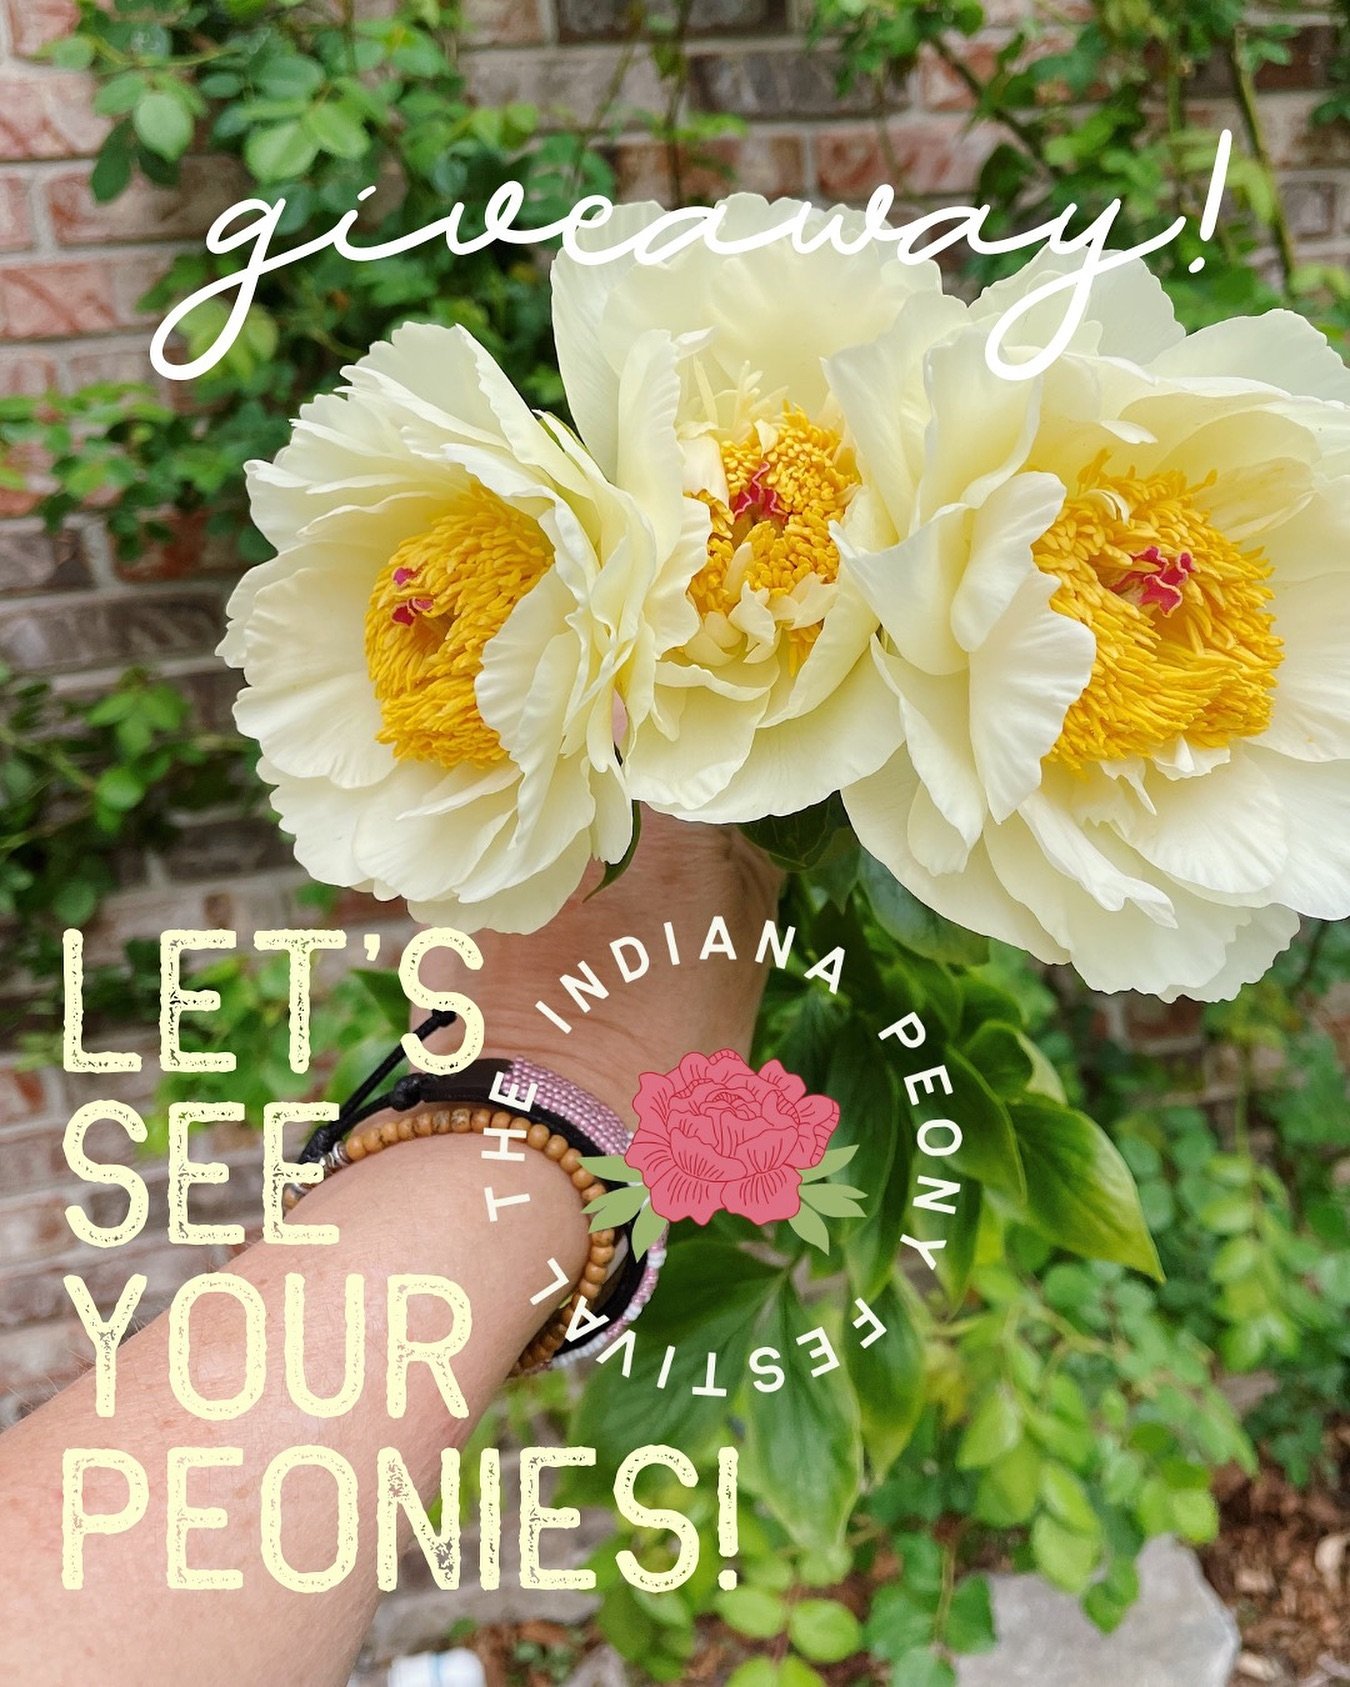 HAPPY PEONY SEASON peony lovers🌸💐🌼 Our town of @noblesvillein is about to be bursting with blooms! Let&rsquo;s see your best peony shot📸 Take your best photo of your blooming peony and tag us on Instagram at @indianapeonyfestival for a chance to 